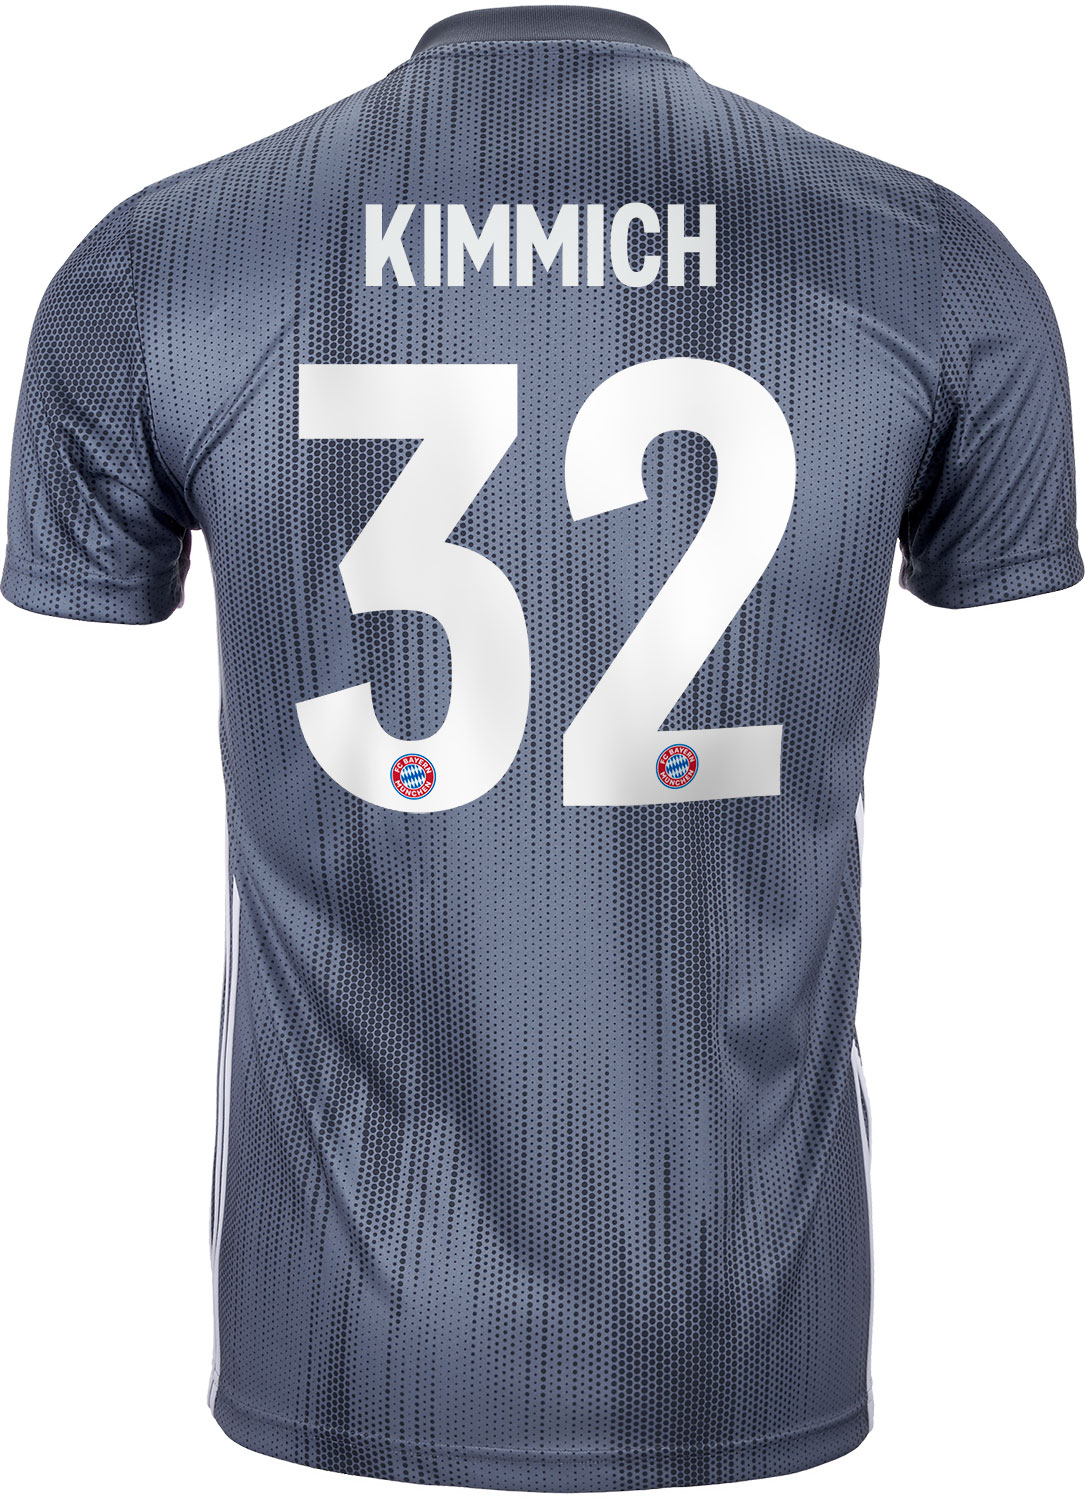 joshua kimmich jersey number